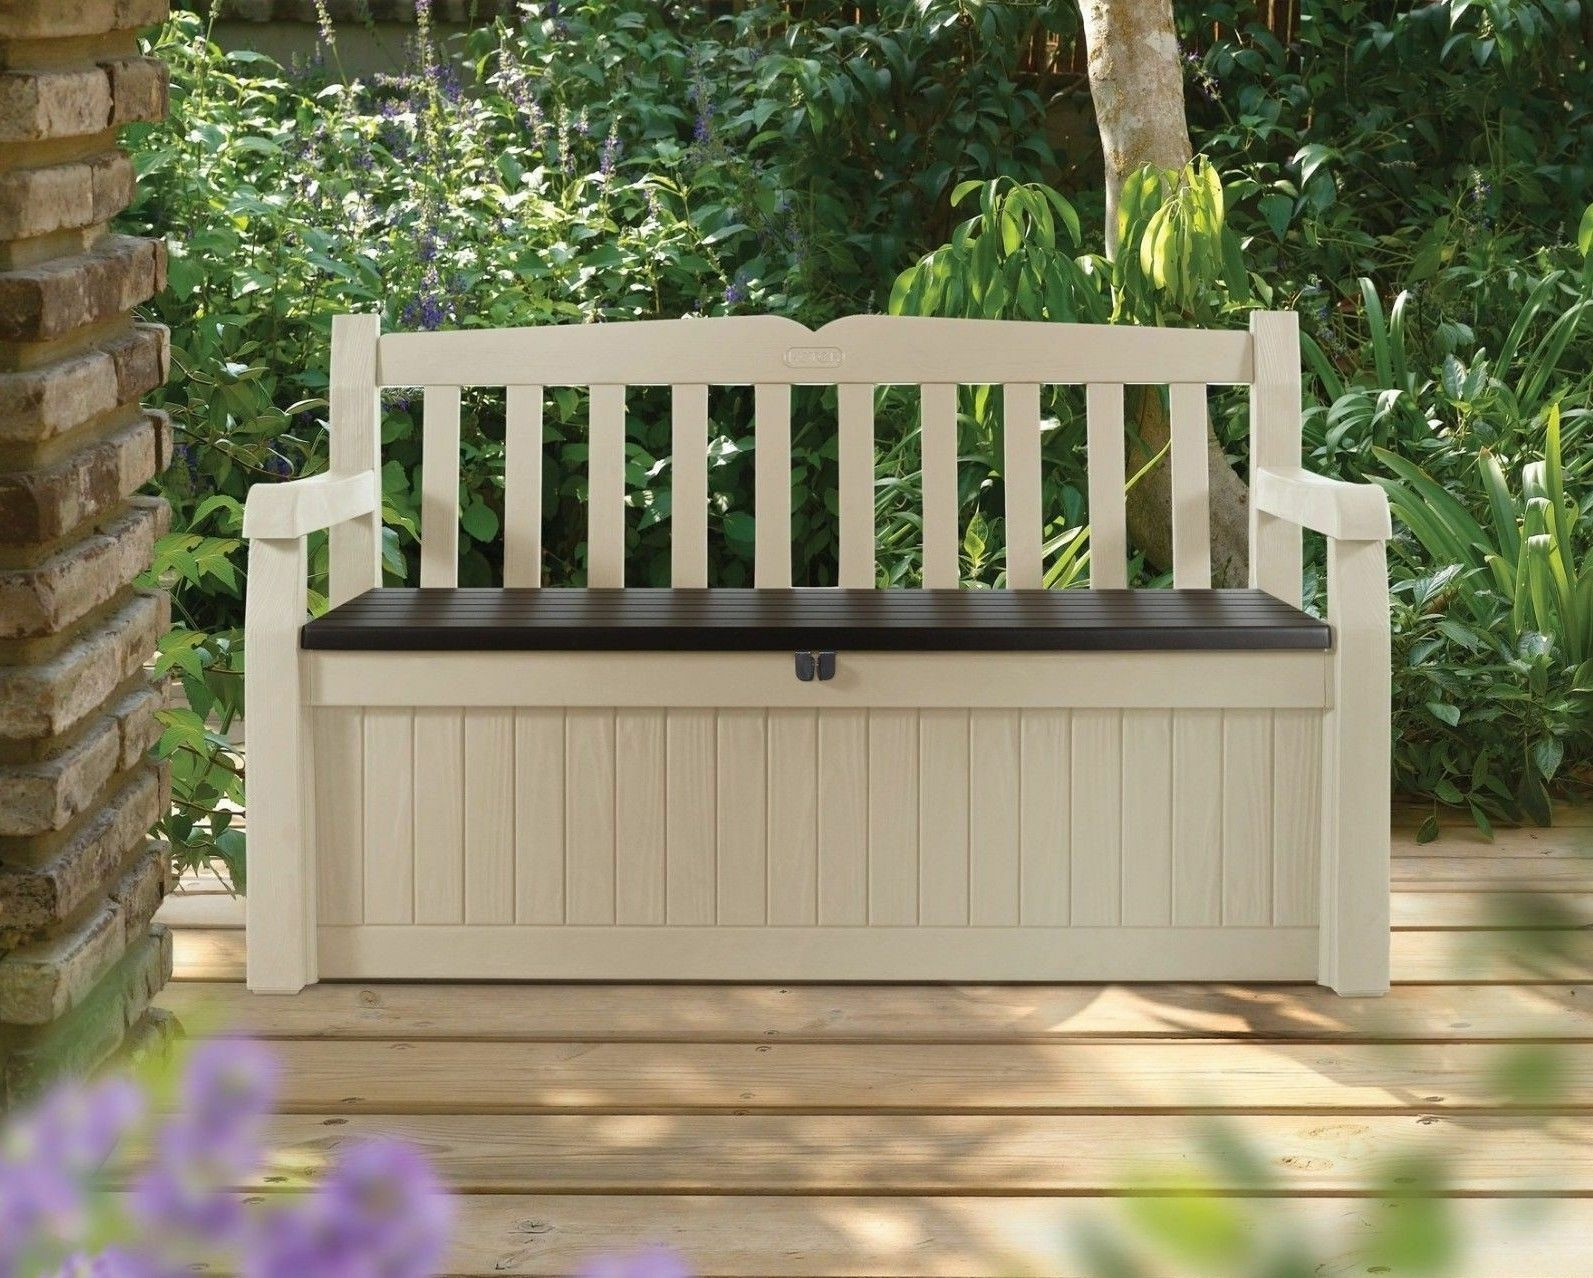 Storage Patio Benches
 How to Build a Deck Storage Bench